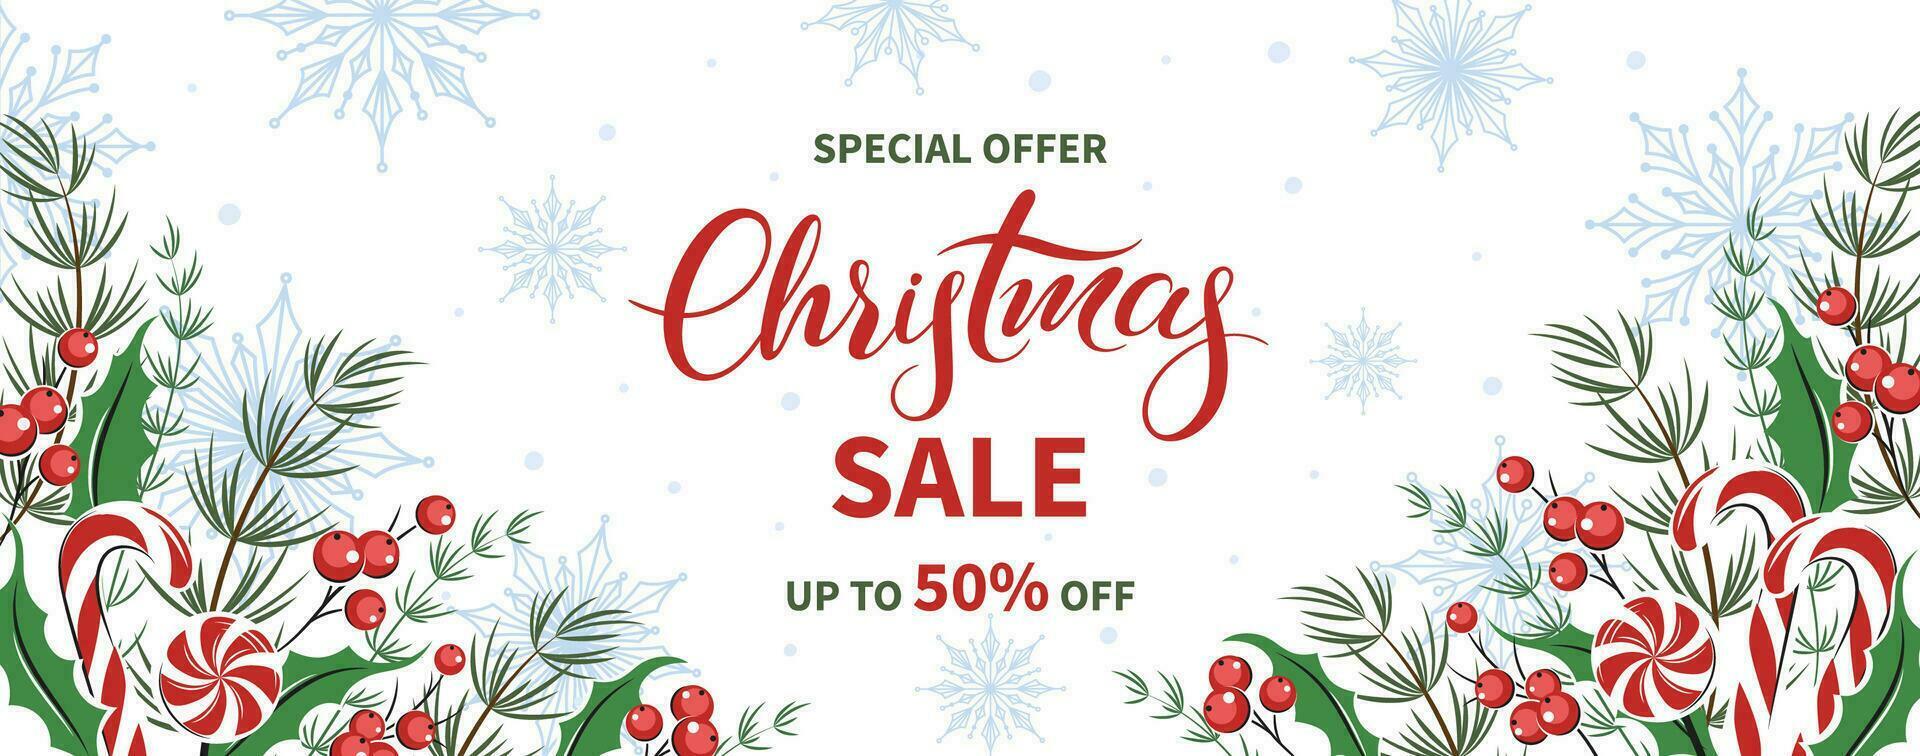 Christmas sale horizontal banner, background decorated with different winter plants, cookies and sweets background. Vector illustration